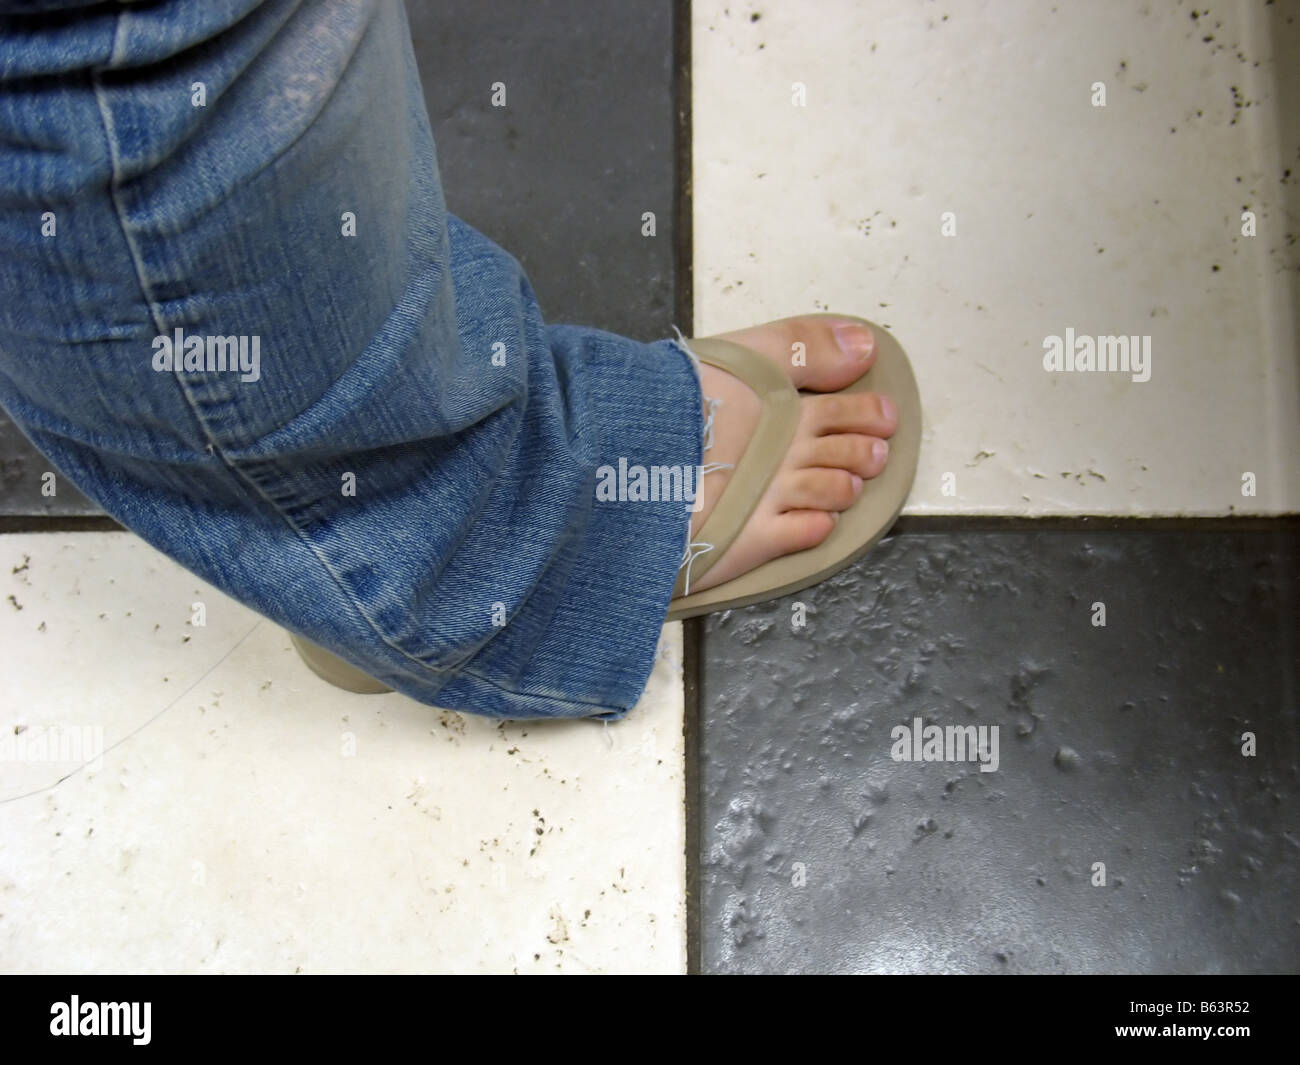 a flip flop on a girl s foot standing on a ceramic tile floor Stock Photo